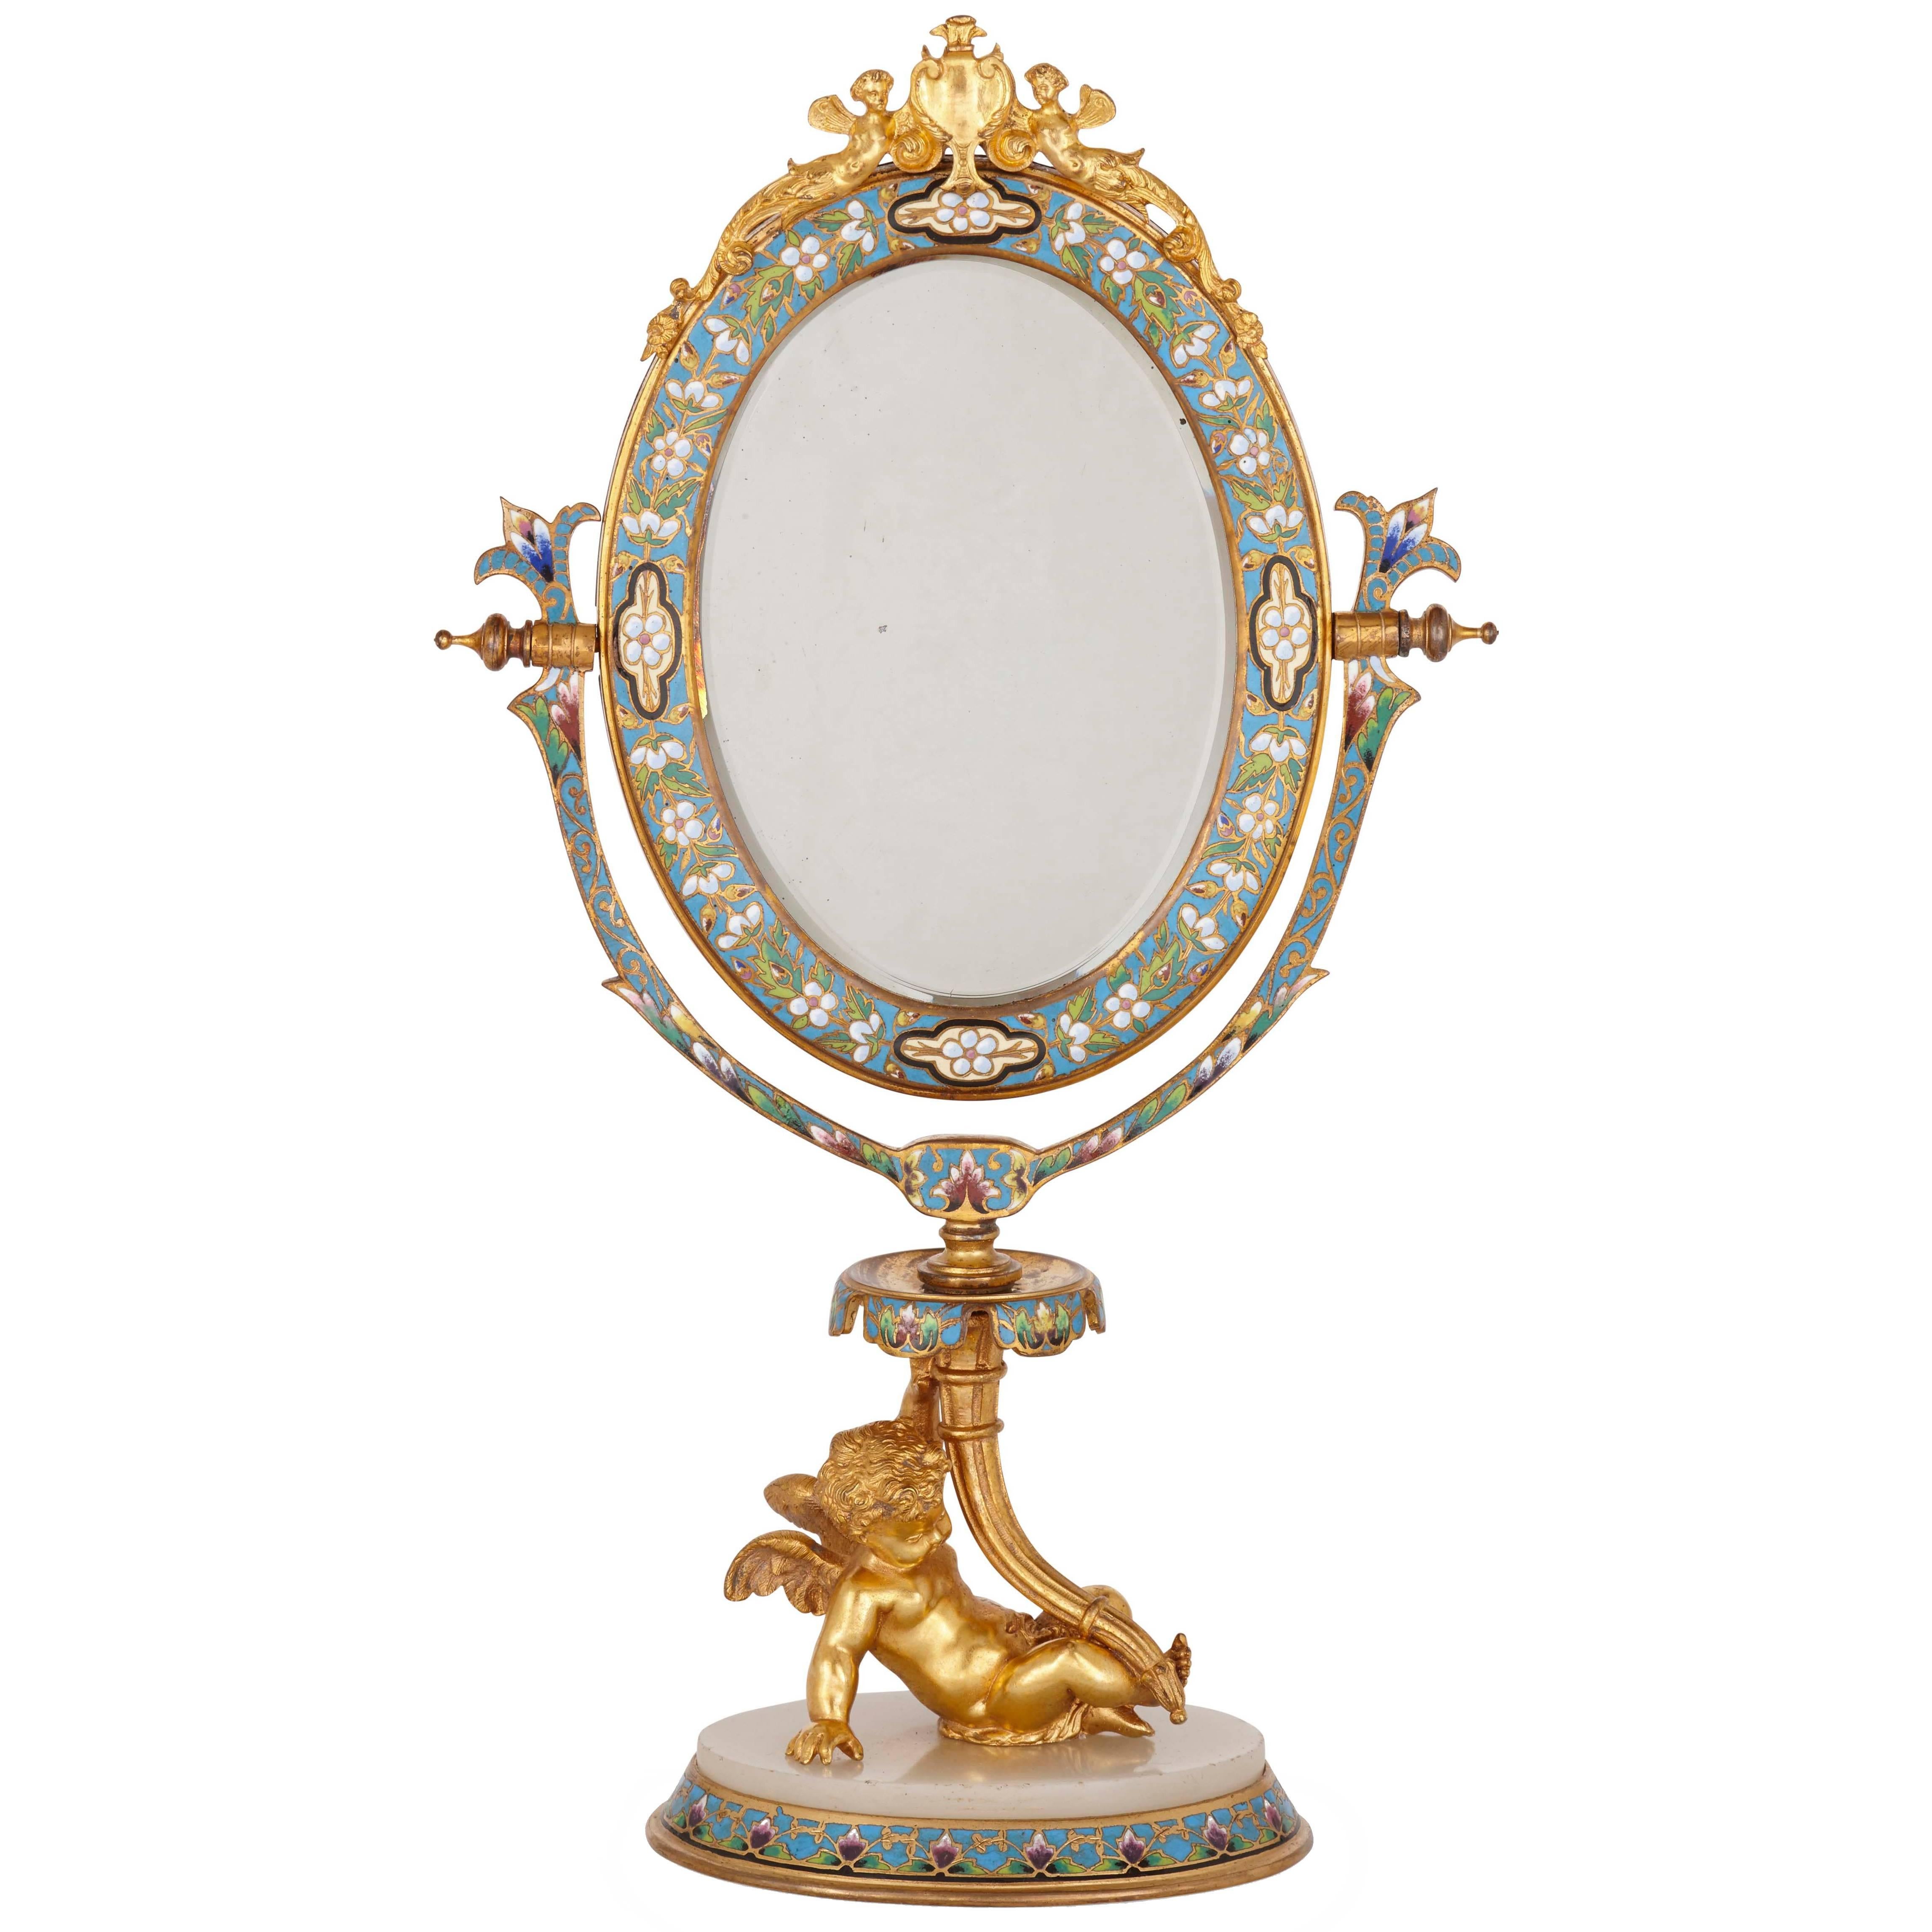 Gilt Bronze, Champlevé Enamel and Alabaster Antique French Dressing Table Mirror